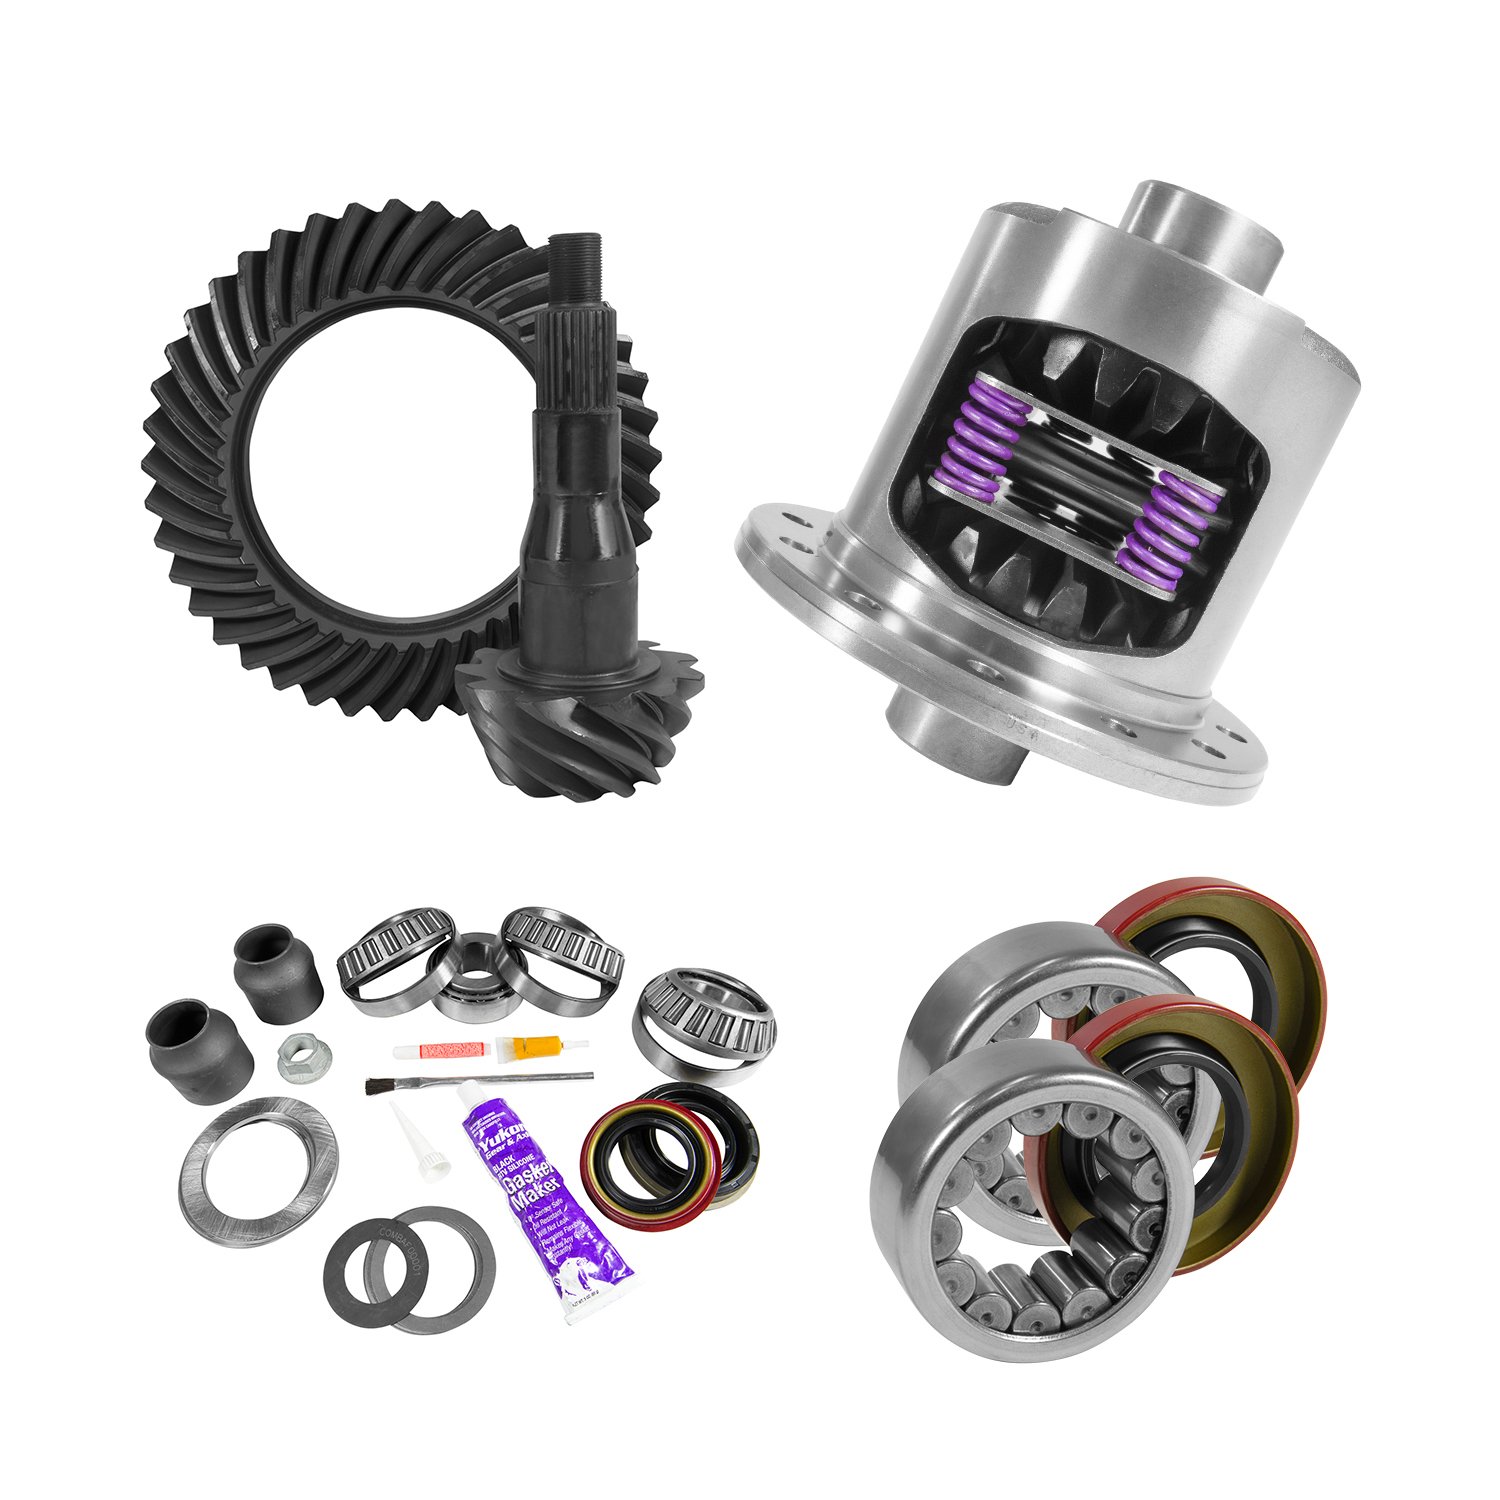 9.75 in. Ford 3.73 Rear Ring & Pinion, Install Kit, 34Spl Posi, 2.99 in. Axle Bearing